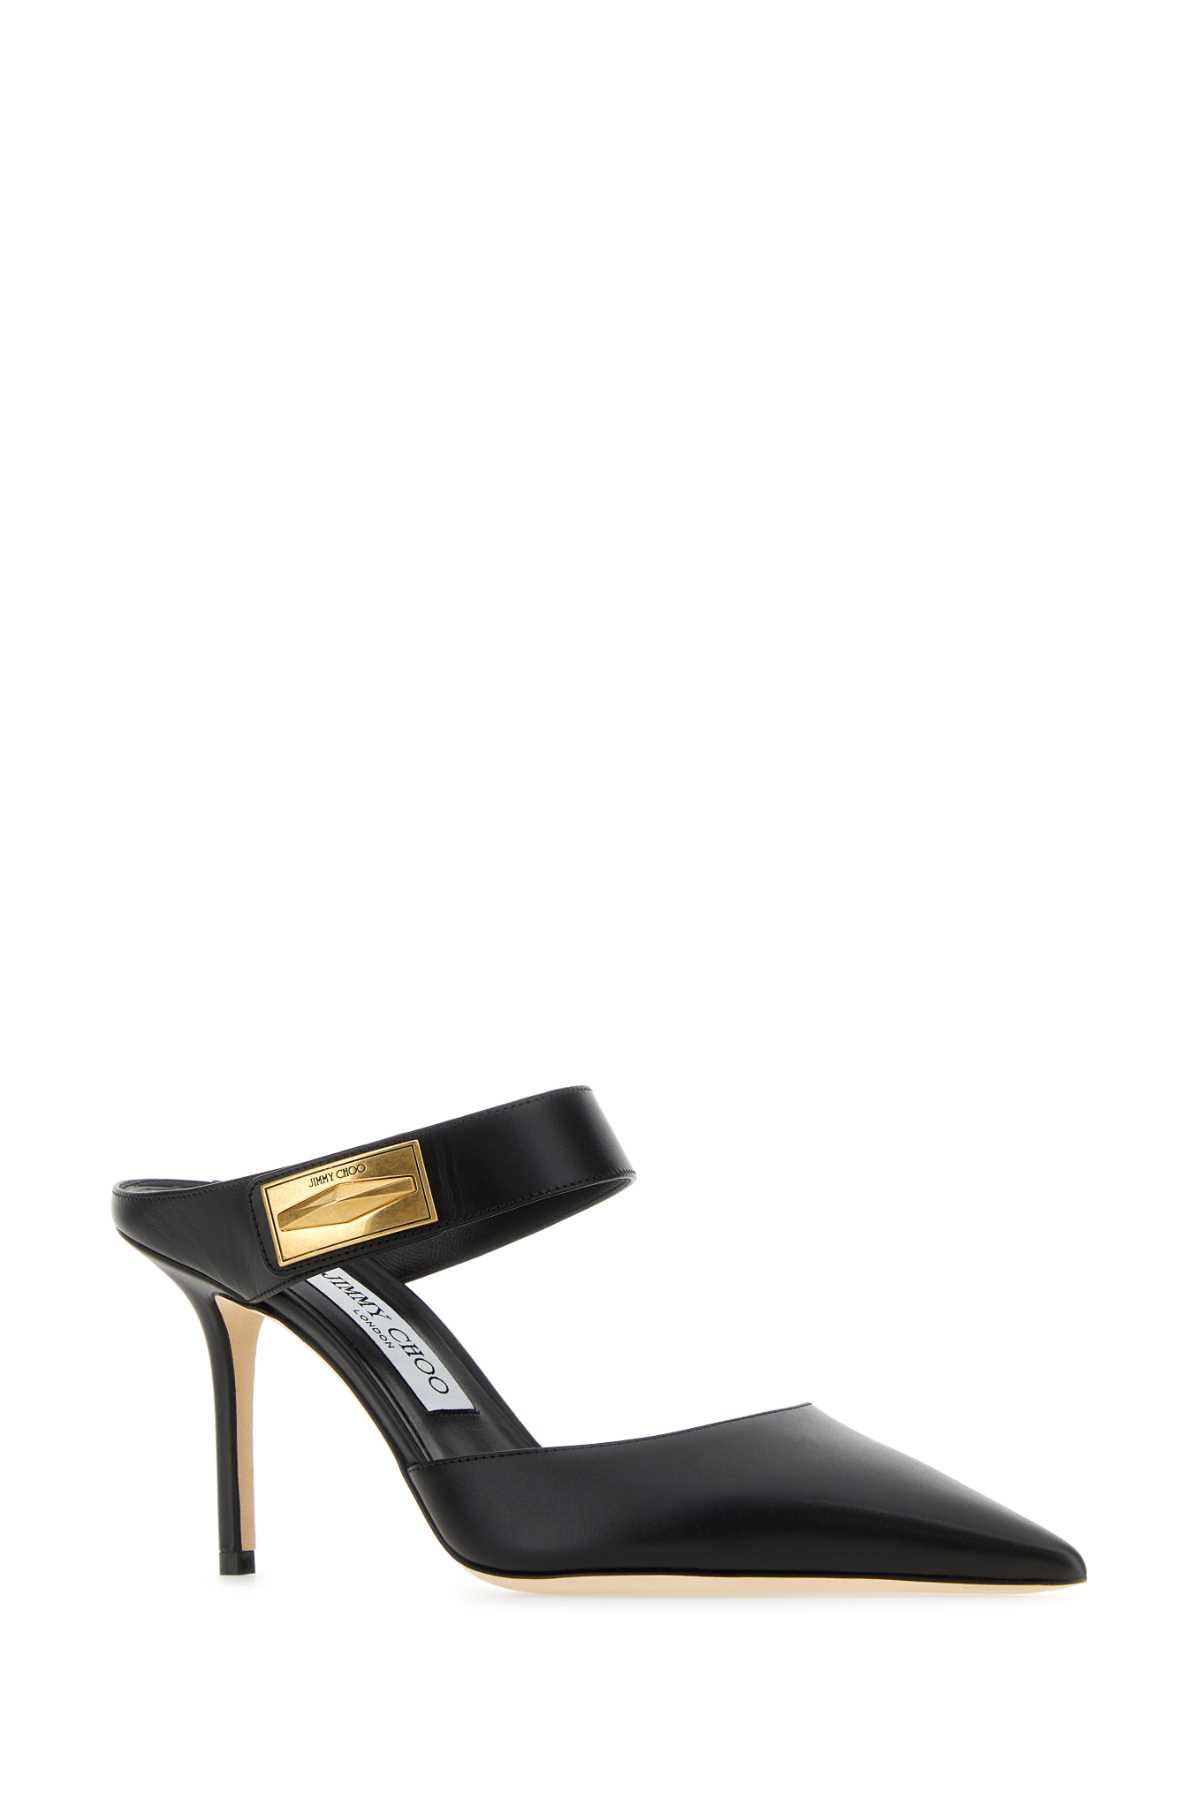 Jimmy Choo Black Leather Nell Mules